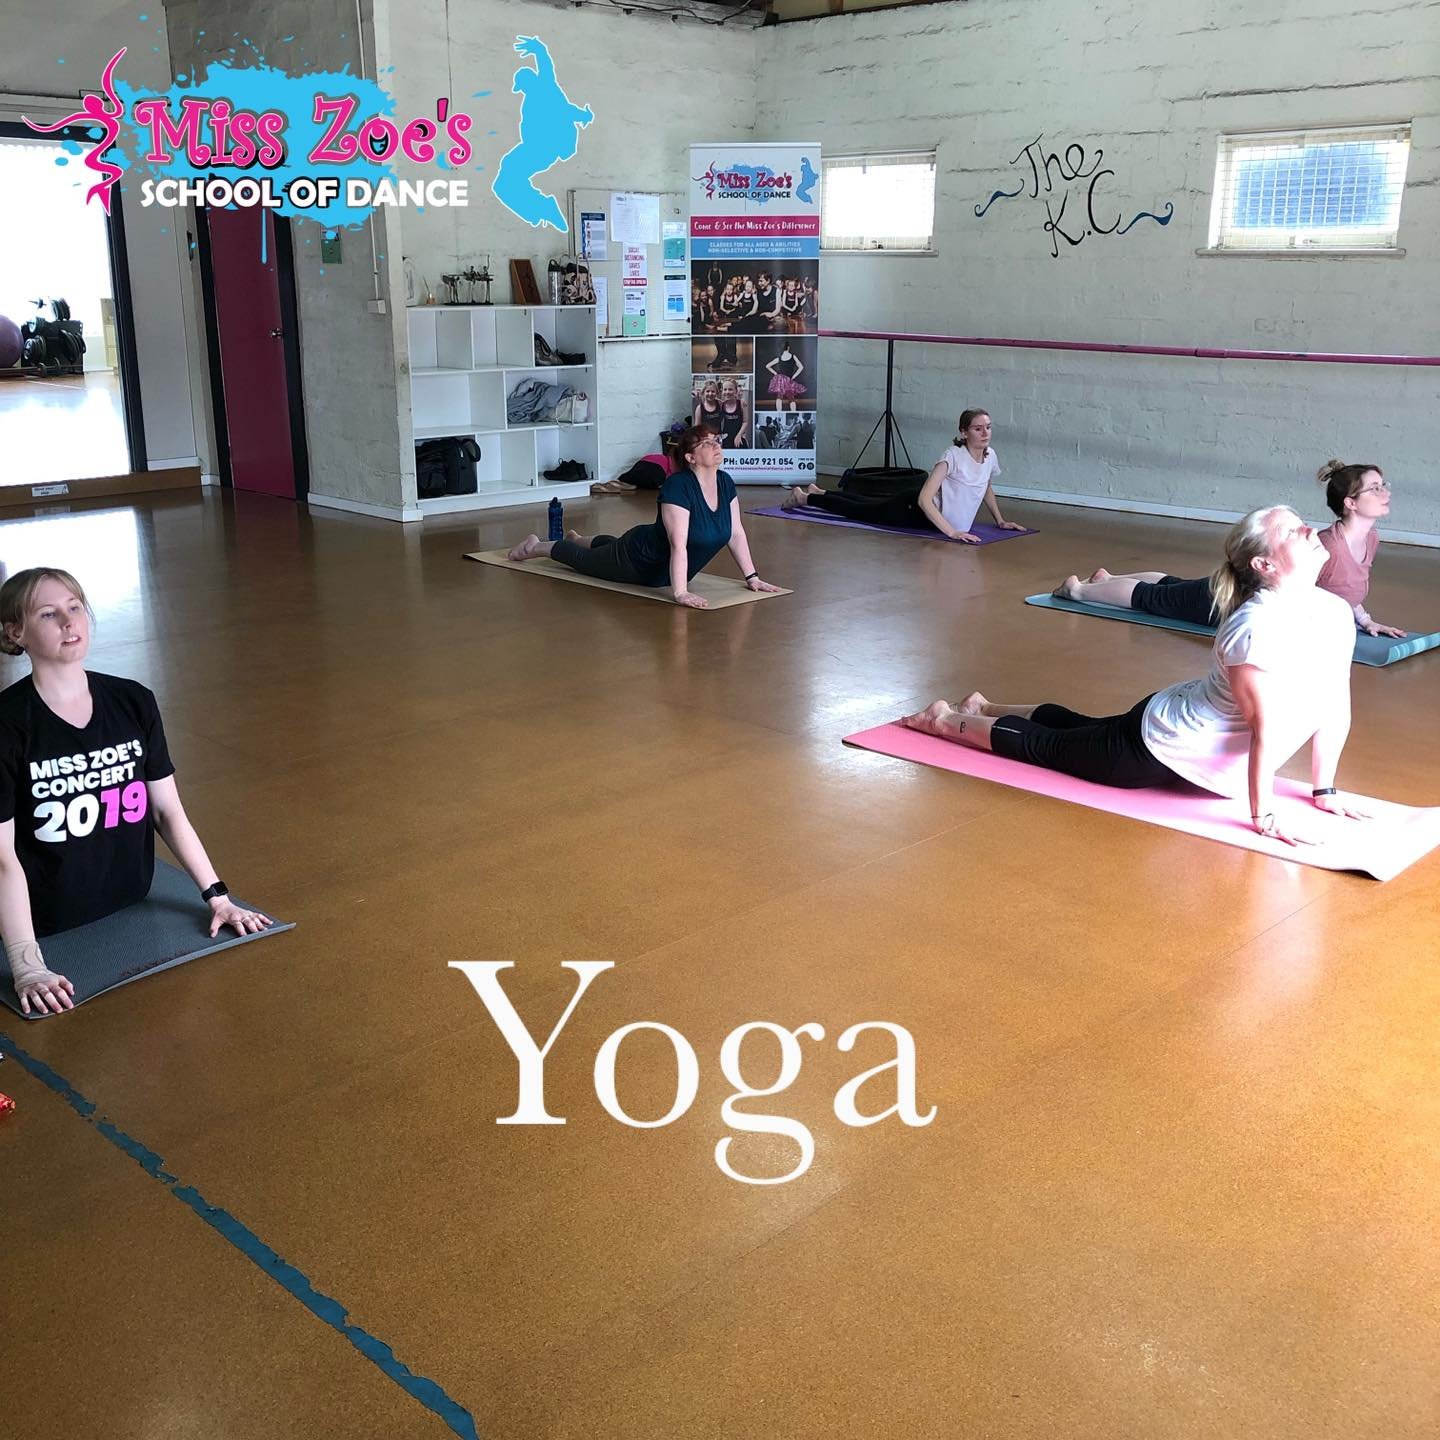 🧘Did you know that we offer Yoga??? FREE trial available ⭐️

Wollongong Studio Mondays 8:45am &amp; Fridays 5:15pm. Pay as you come, no joining fee!

#wollongong #misszoesschoolofdance #illawarra #yoga #yogawollongong #yogaillawarra #illawarrayoga #